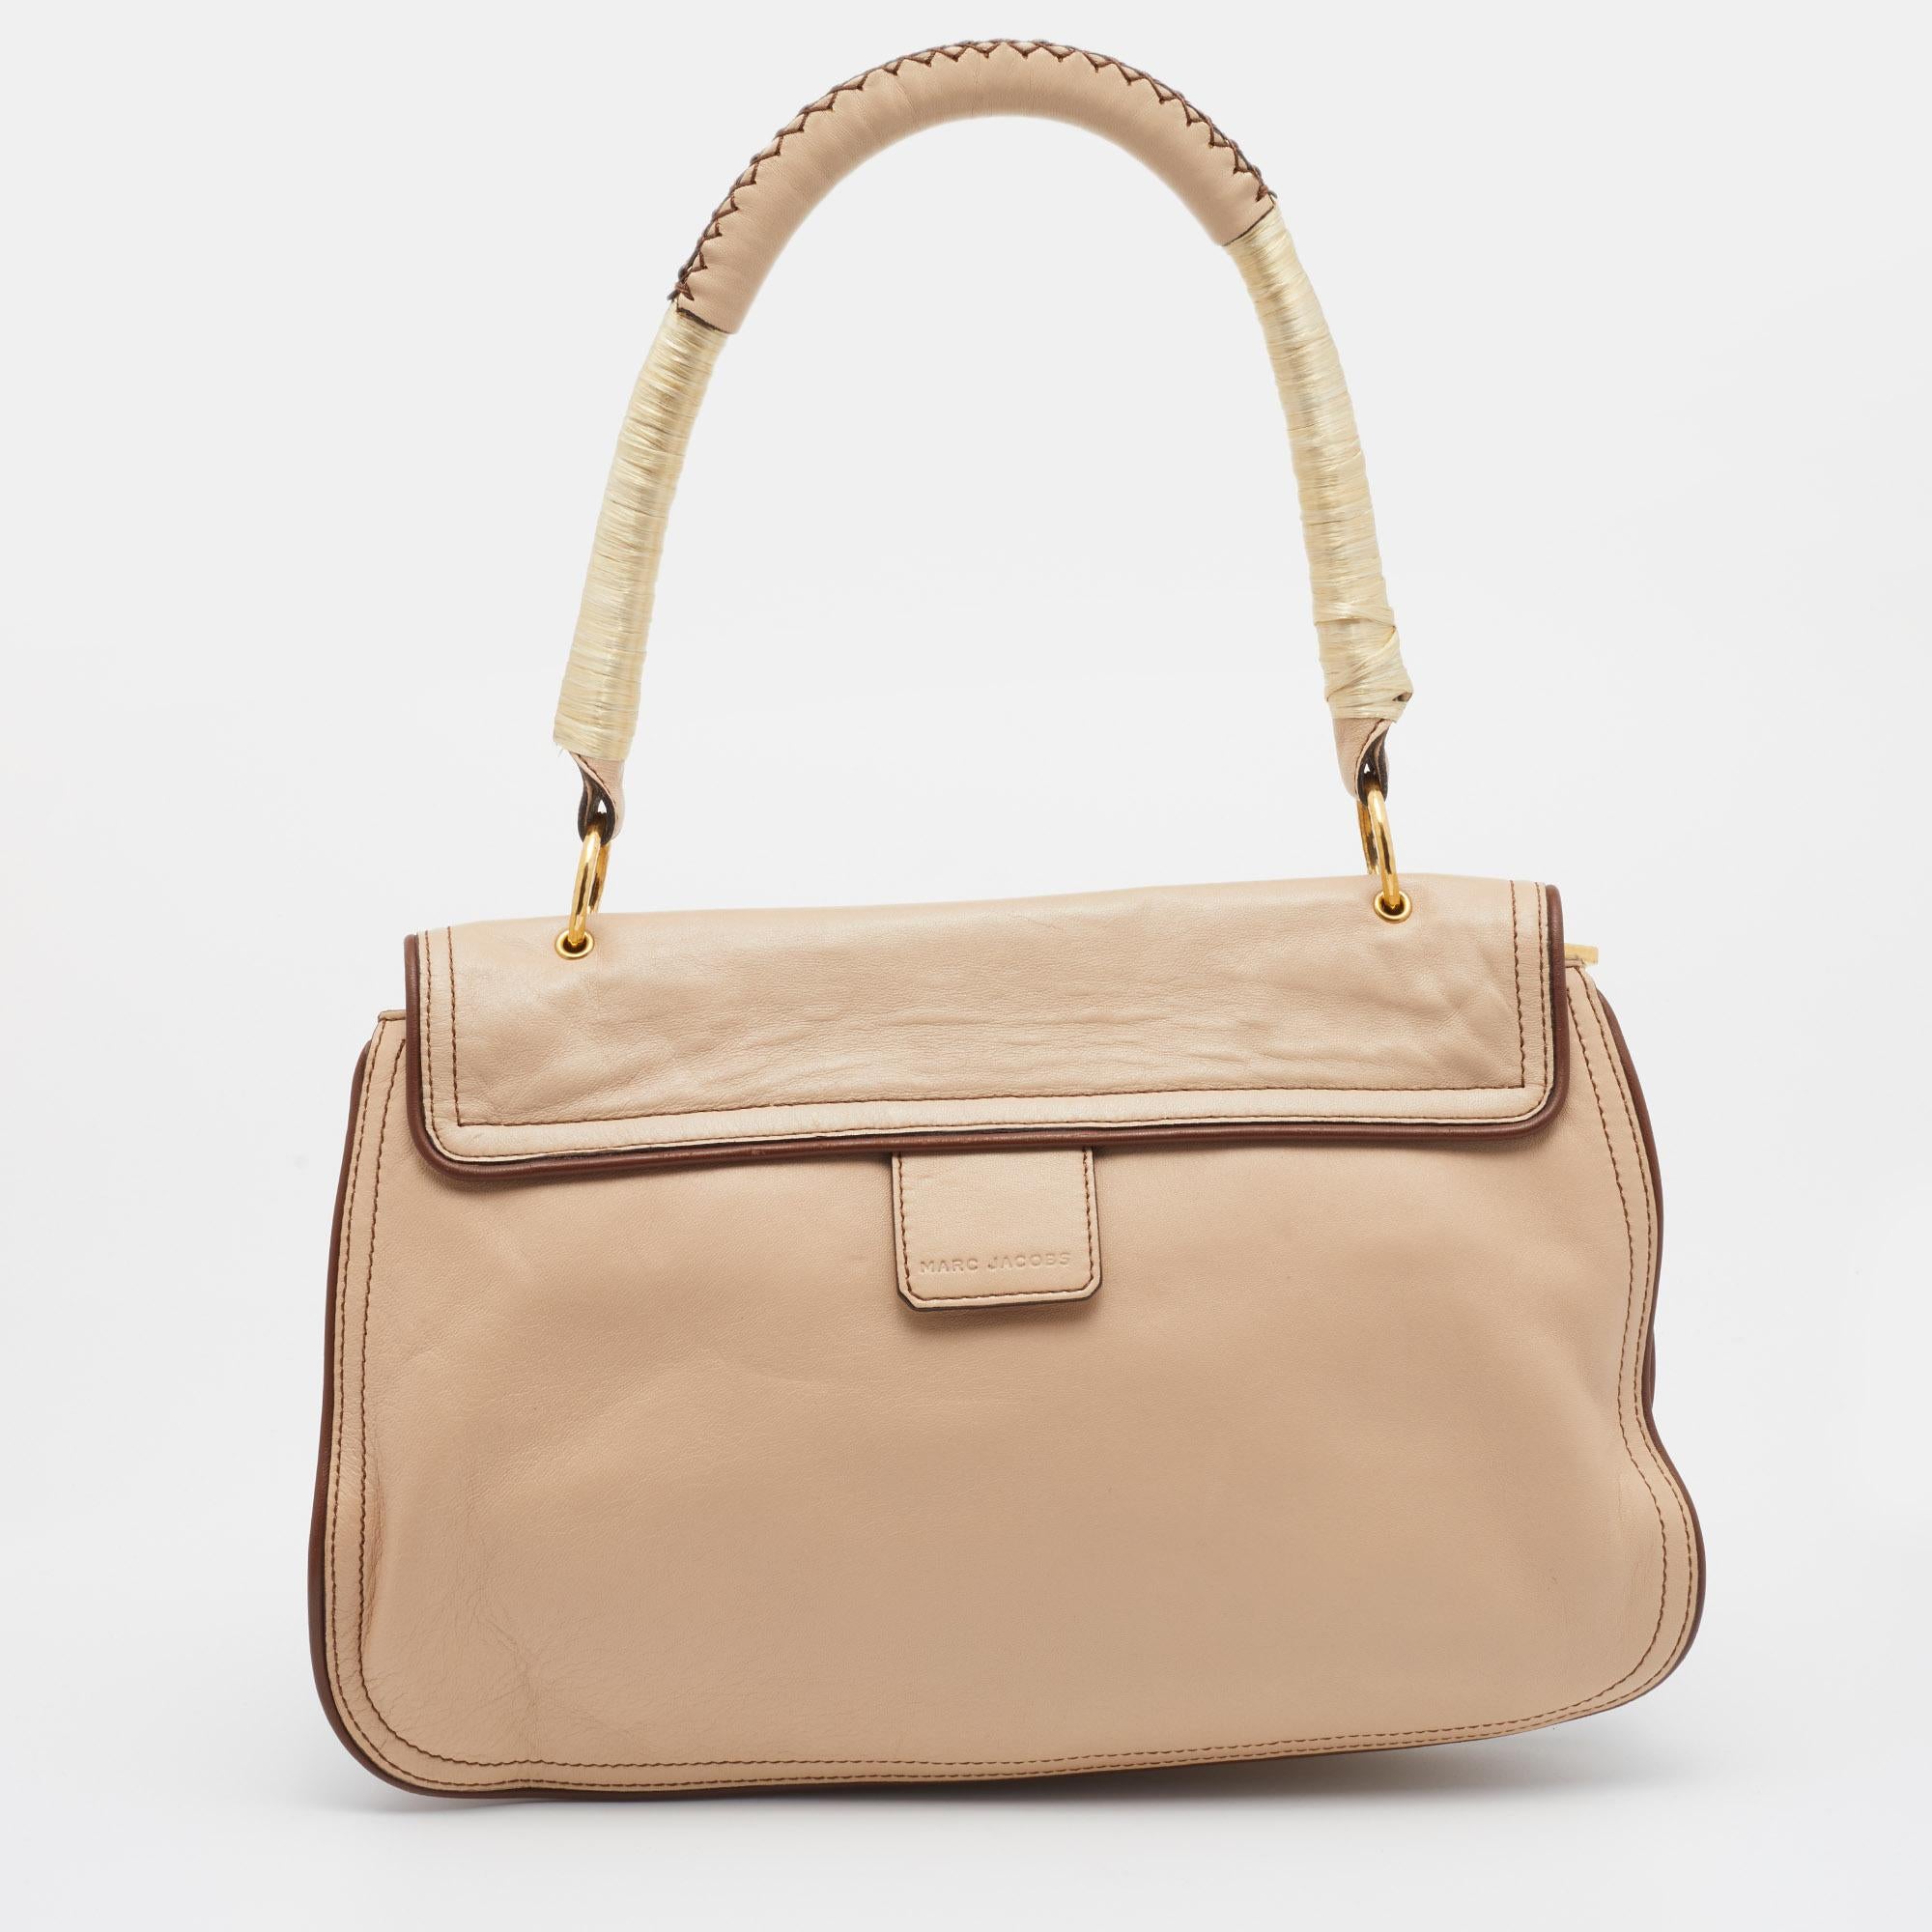 Showcase an elegant style by accessorizing your outfit with this Marc Jacobs bag. Crafted from leather, the design is highlighted with crystal-embellished closure on the front flap and is held by a single handle at the top. The satin-lined interior